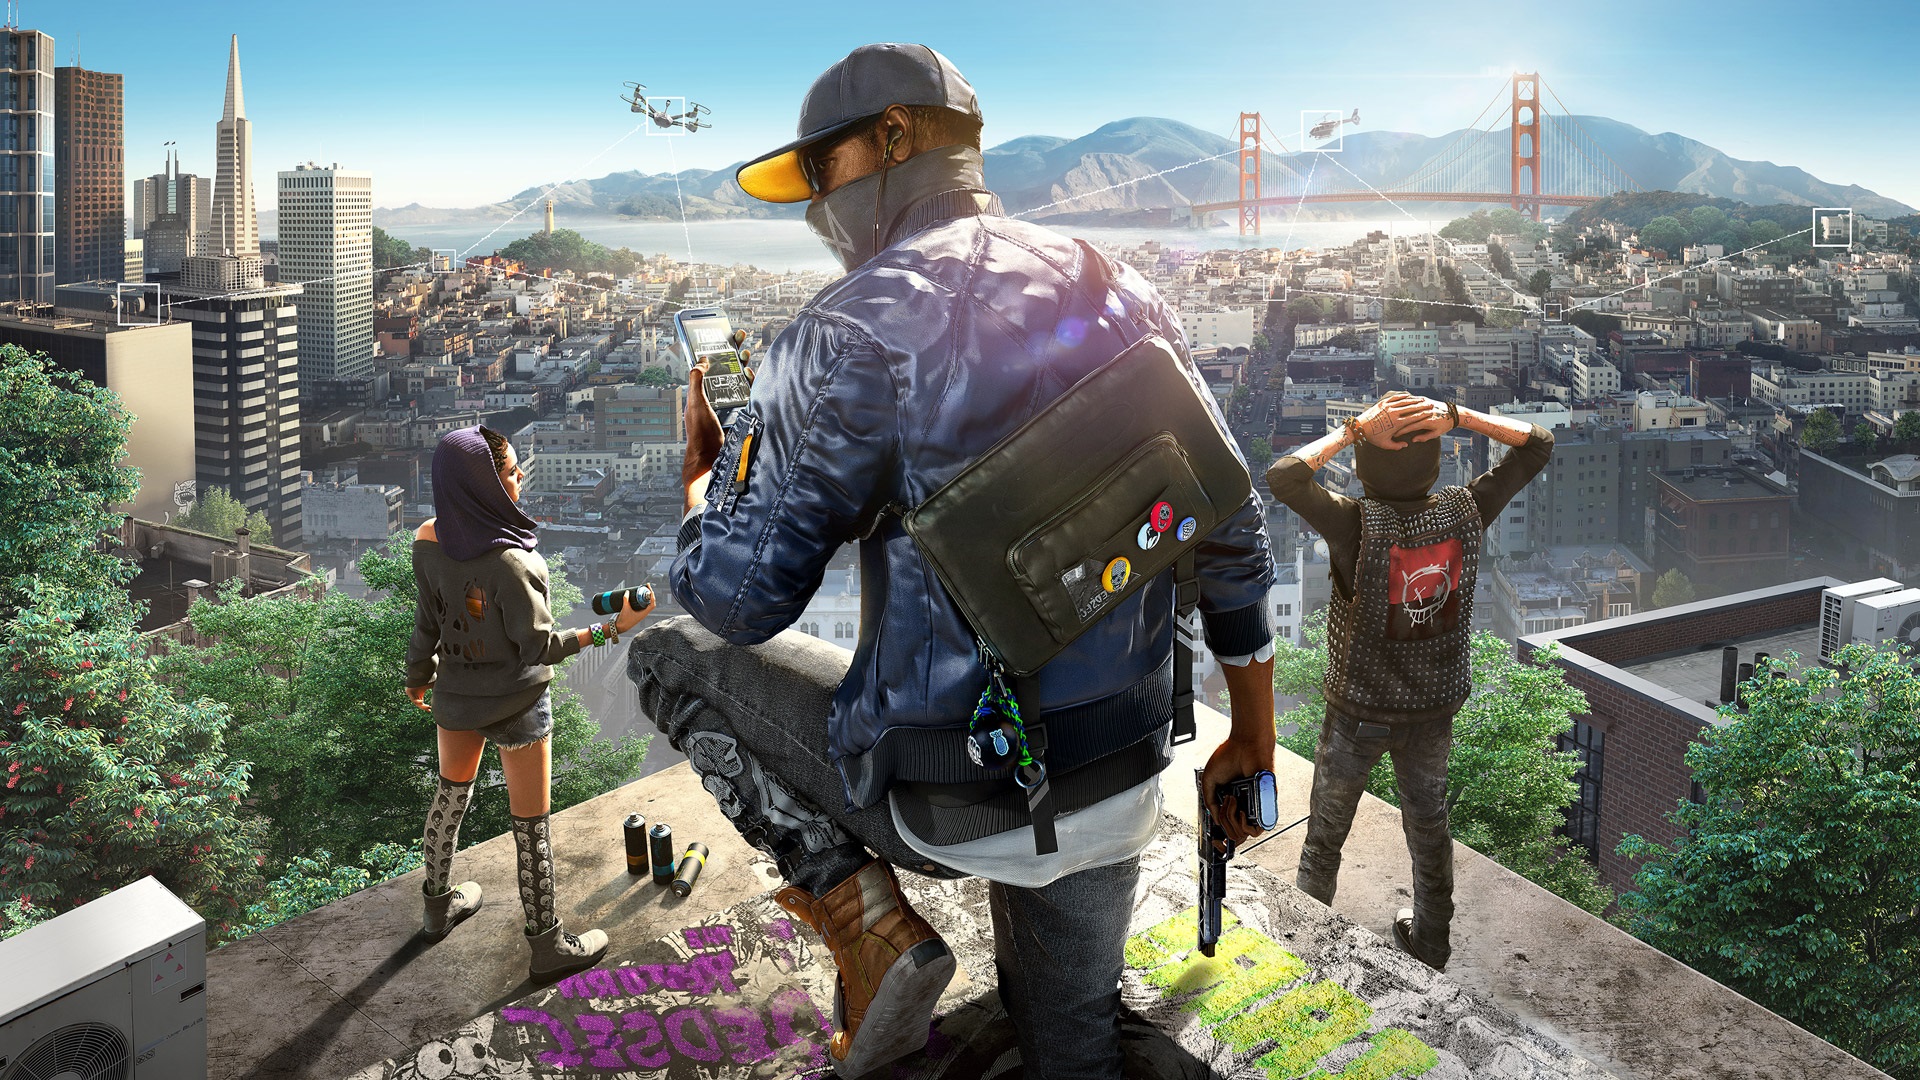 Free download Watch Dogs 2 HD Wallpapers and Background Images stmednet